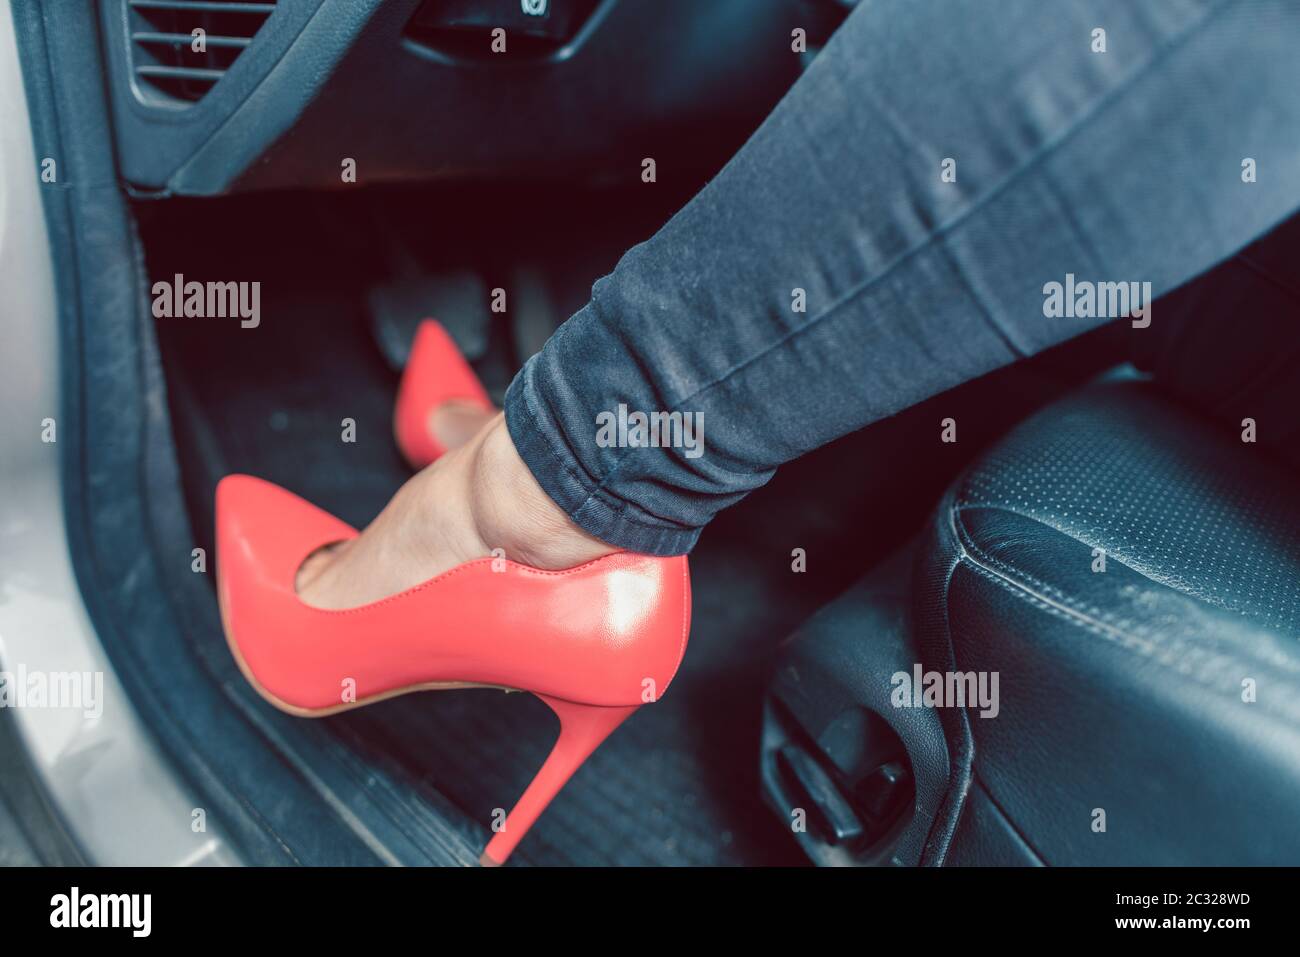 Woman driving a car in an unsafe manner with red high-heel shoes Stock Photo